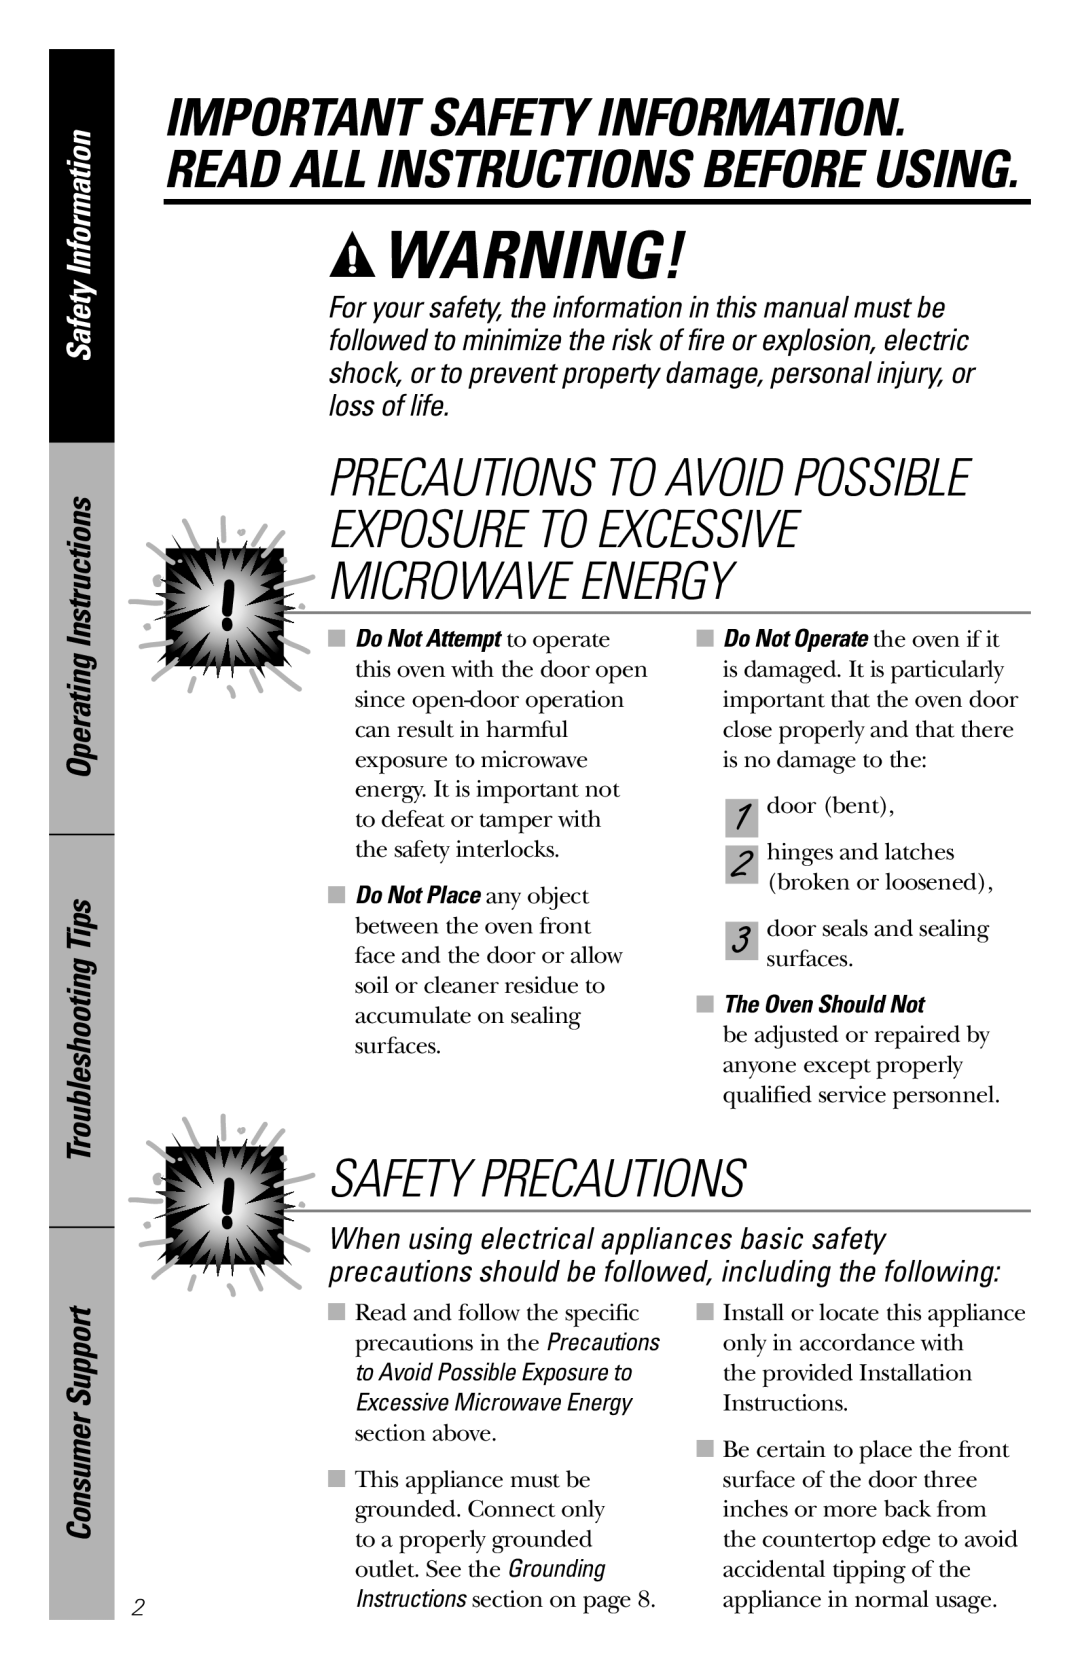 GE WES1130 Safety Precautions, Important Safety Information. Read All Instructions Before Using, Consumer Support 